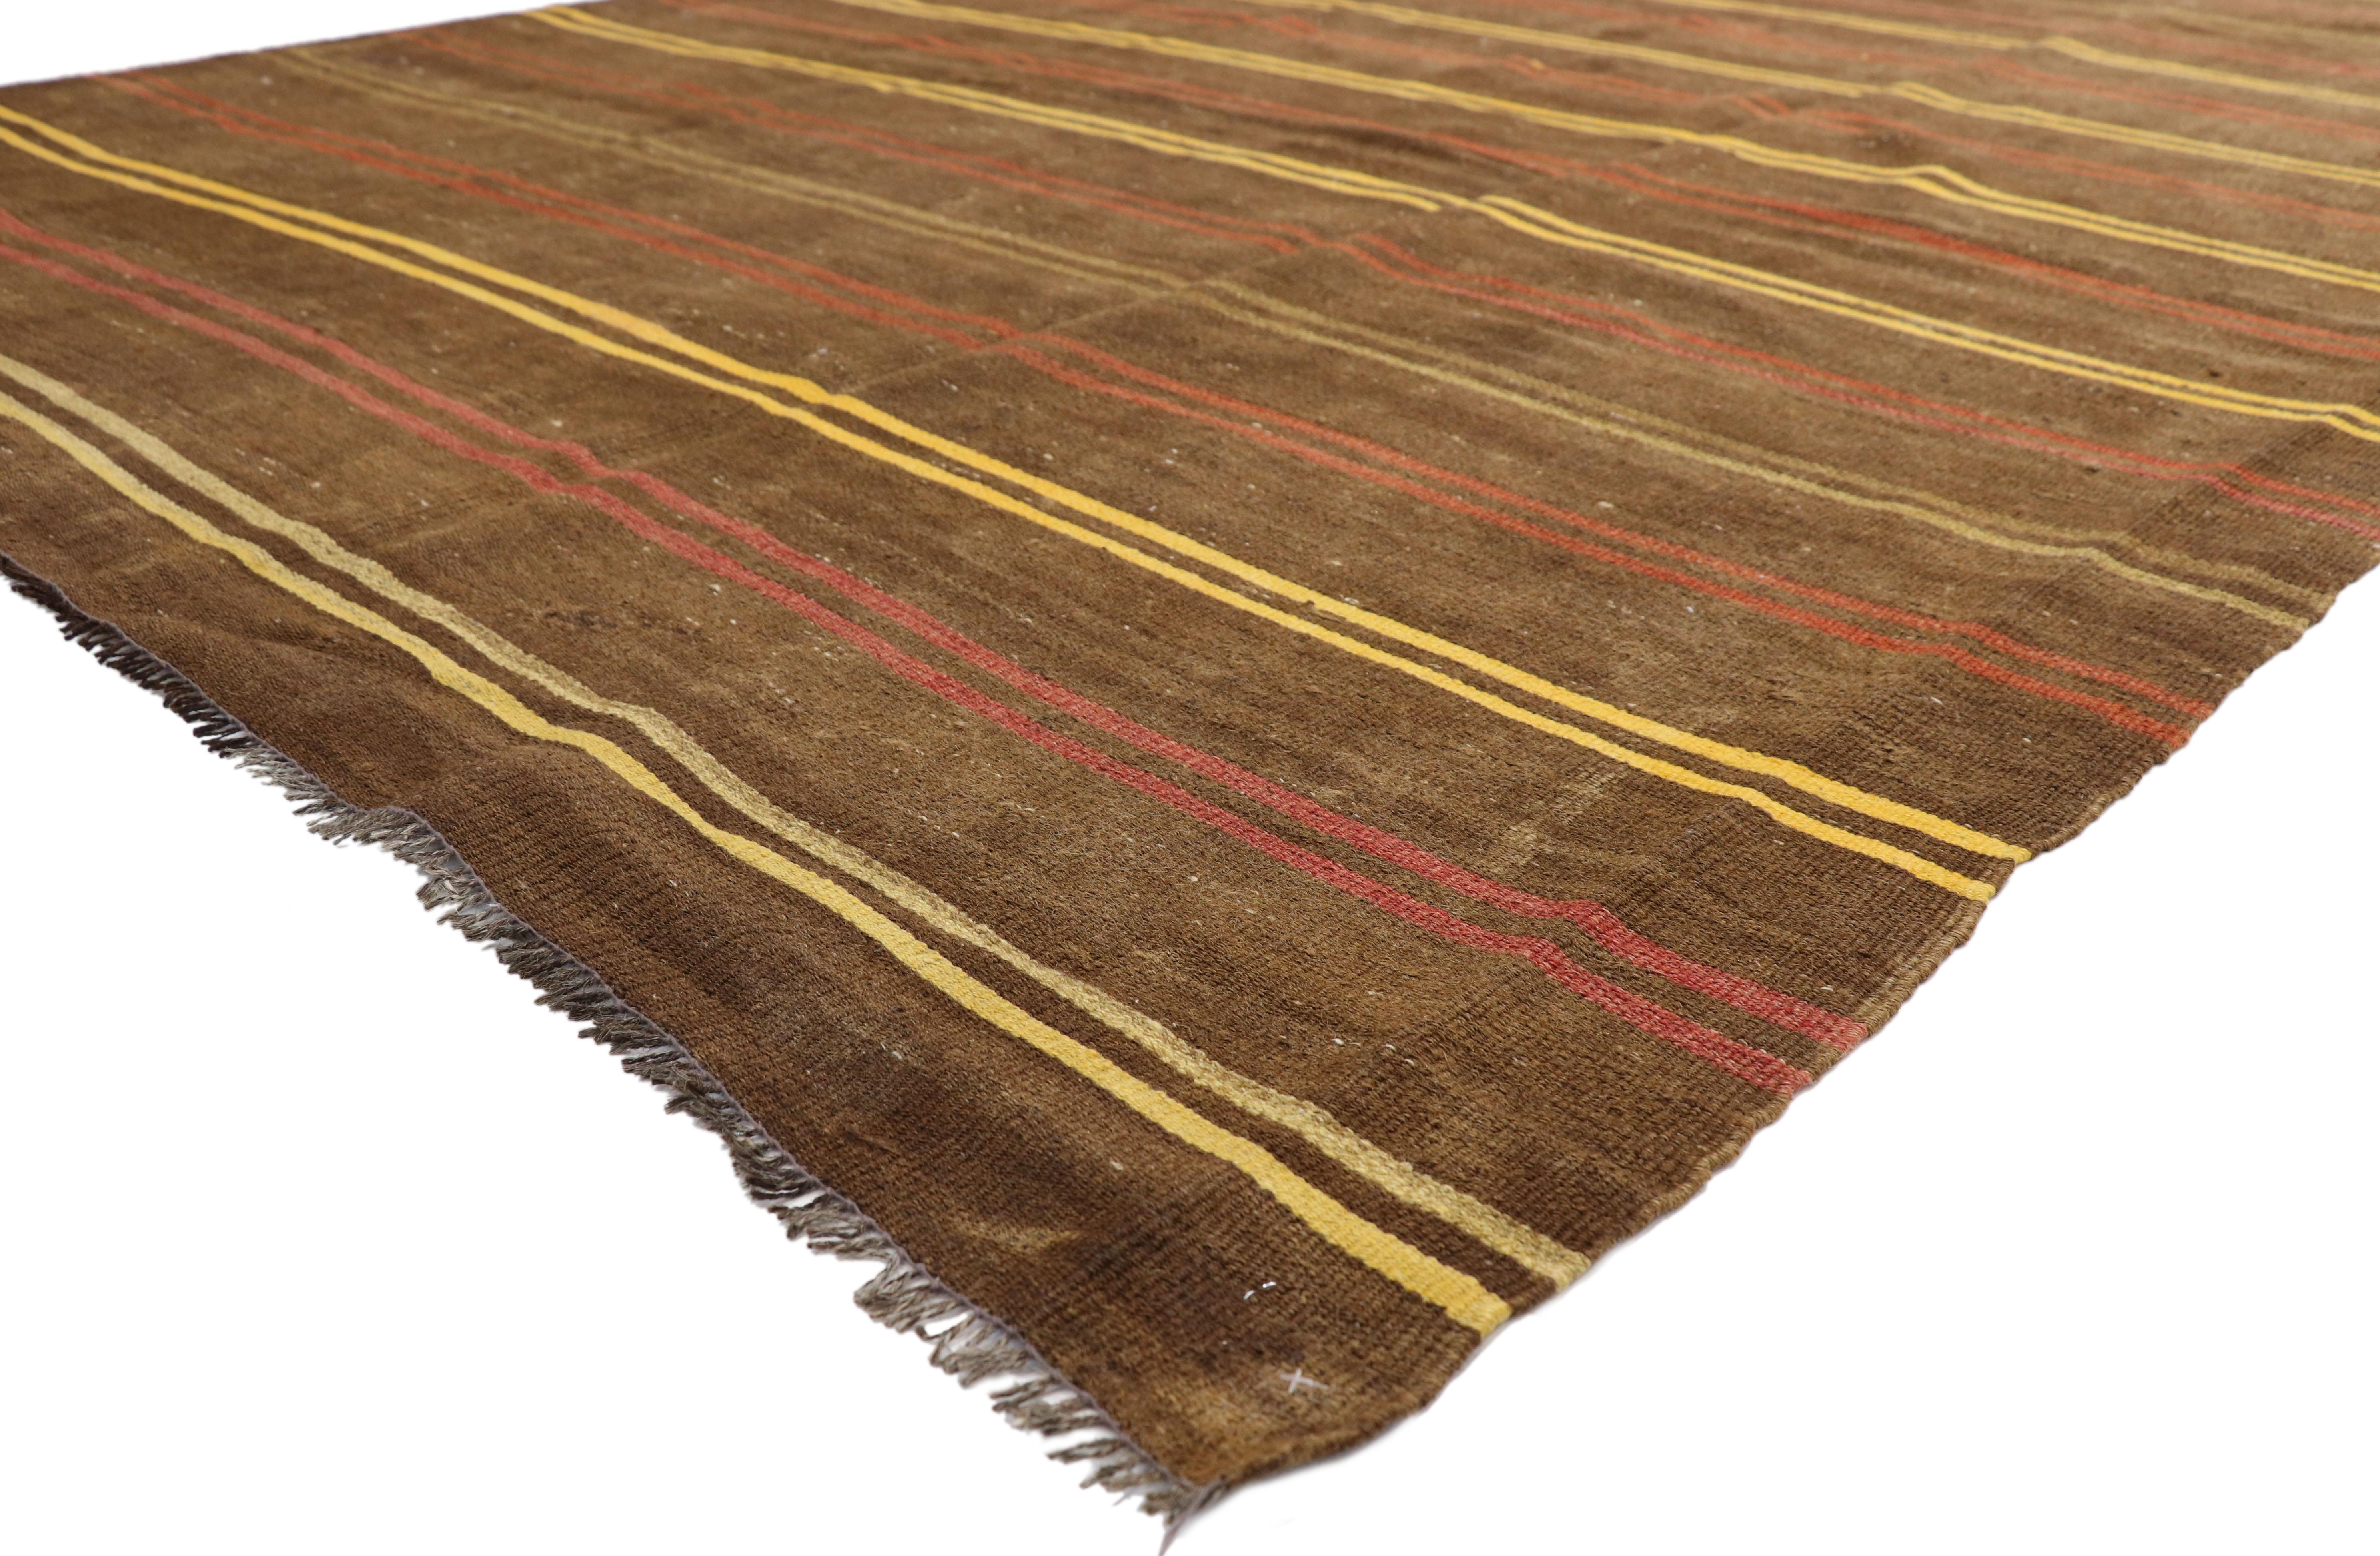 51320, vintage Turkish striped Kilim rug with Bohemian Tribal style, flat-weave rug. This handwoven wool vintage Turkish striped Kilim rug features double colored bands in alternating colors dotted with a few symbolic Turkish motifs on a warm brown